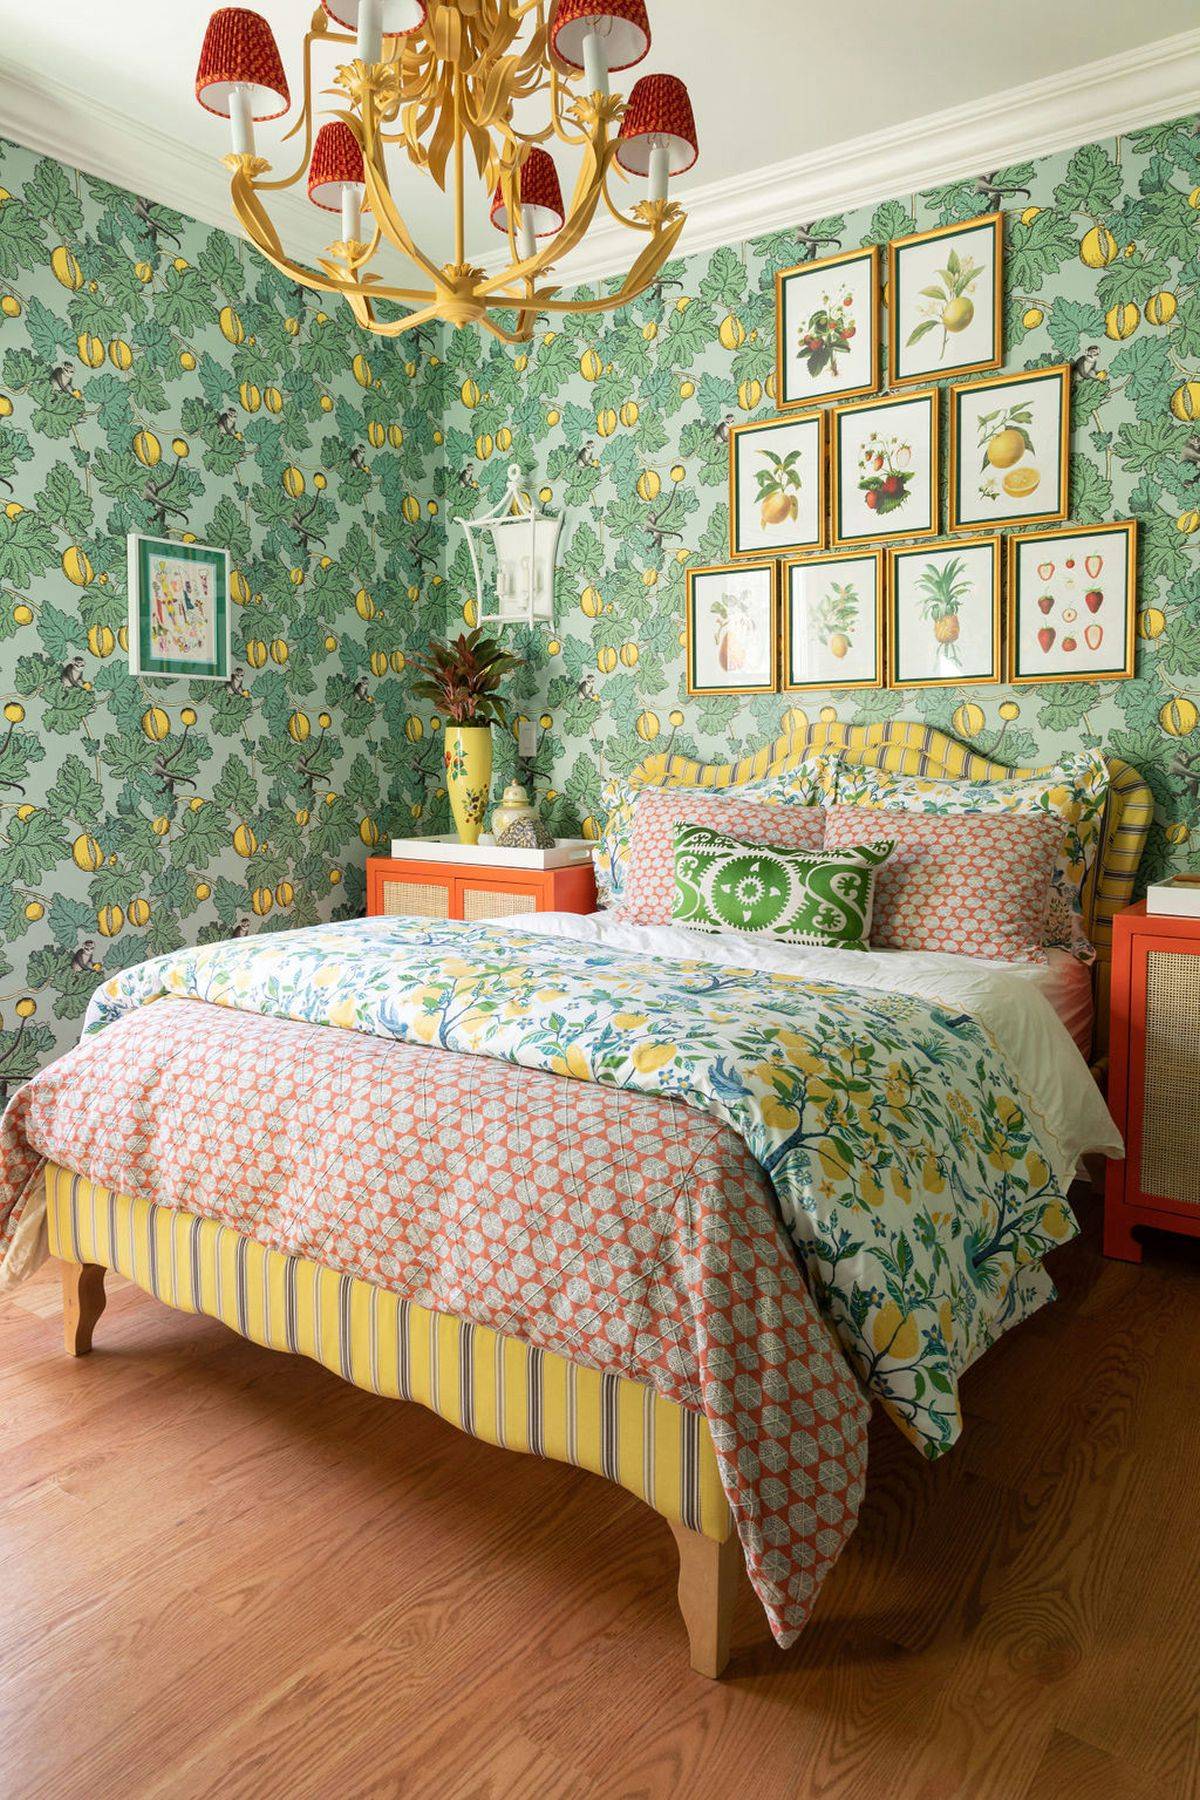 Vivacious leafy patterns are back with a bang in bedrooms this season